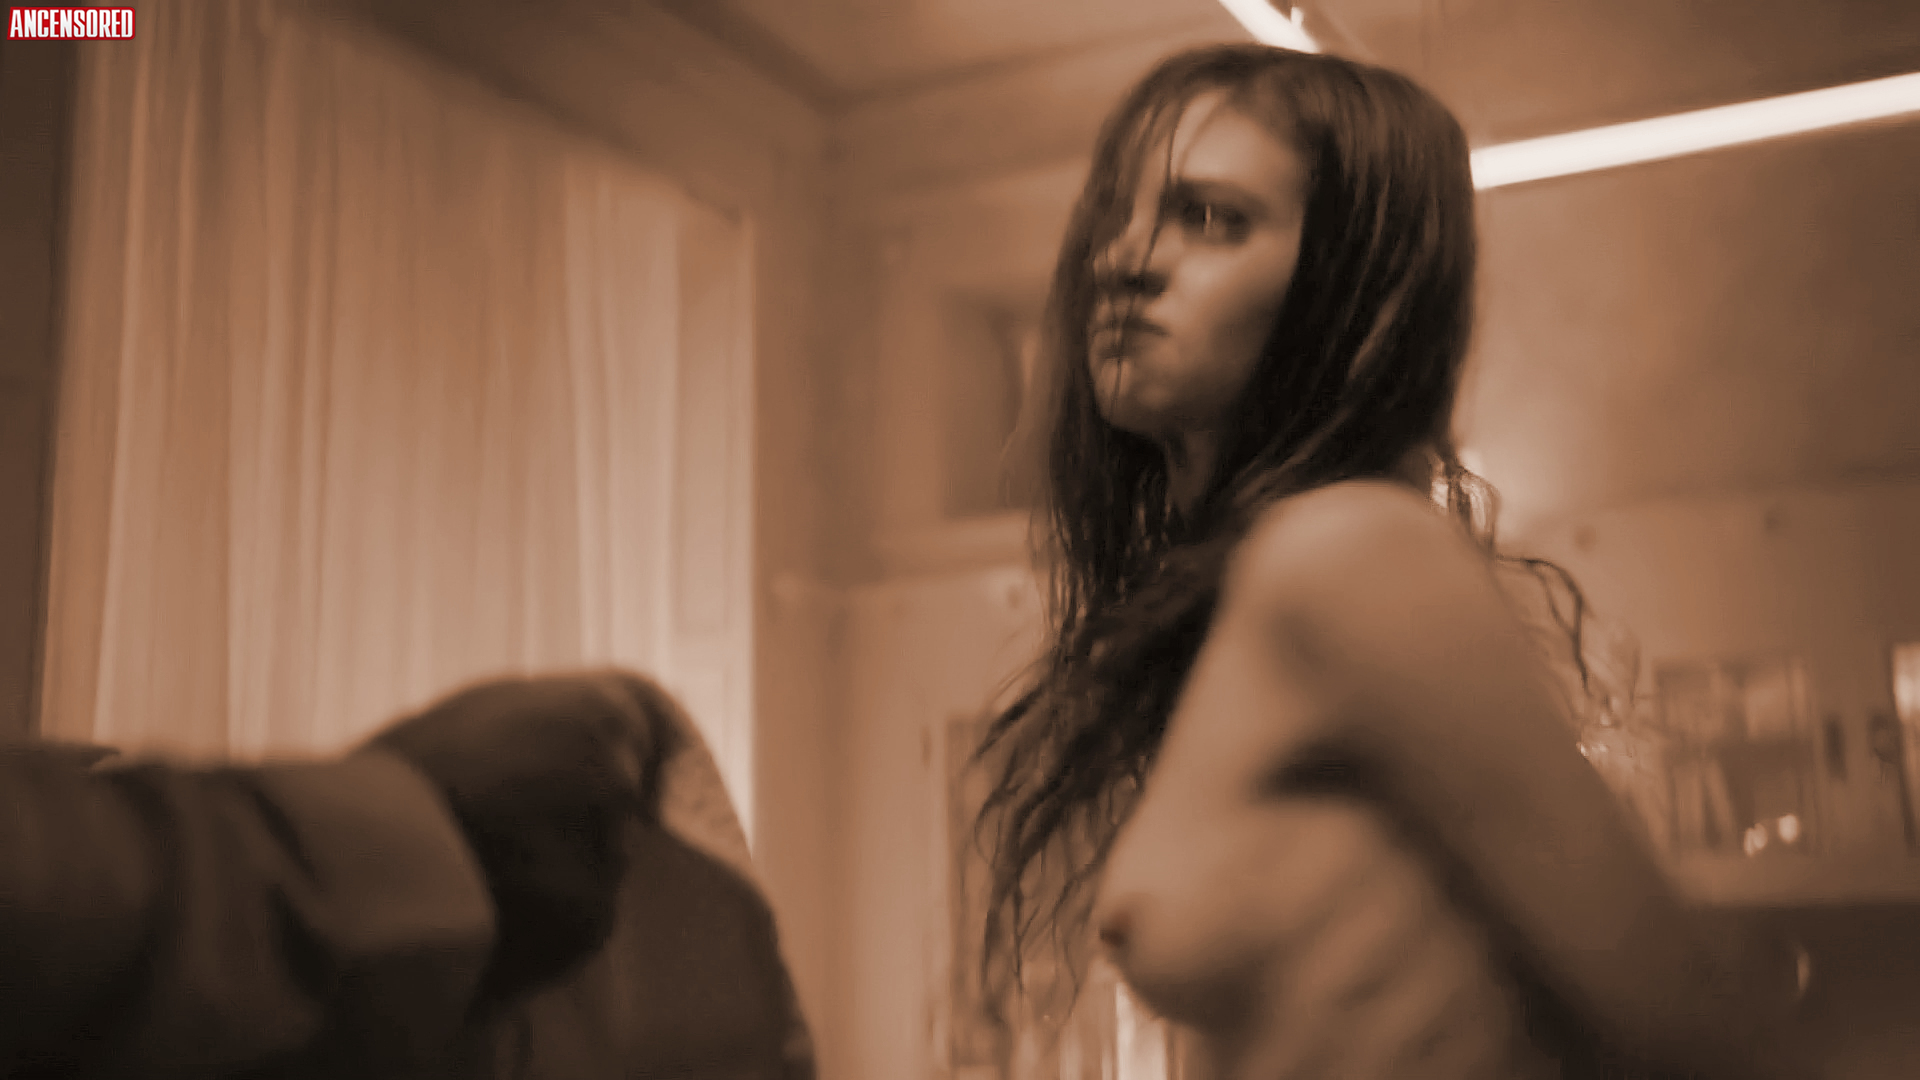 Fight C. reccomend india eisley nude scenes from